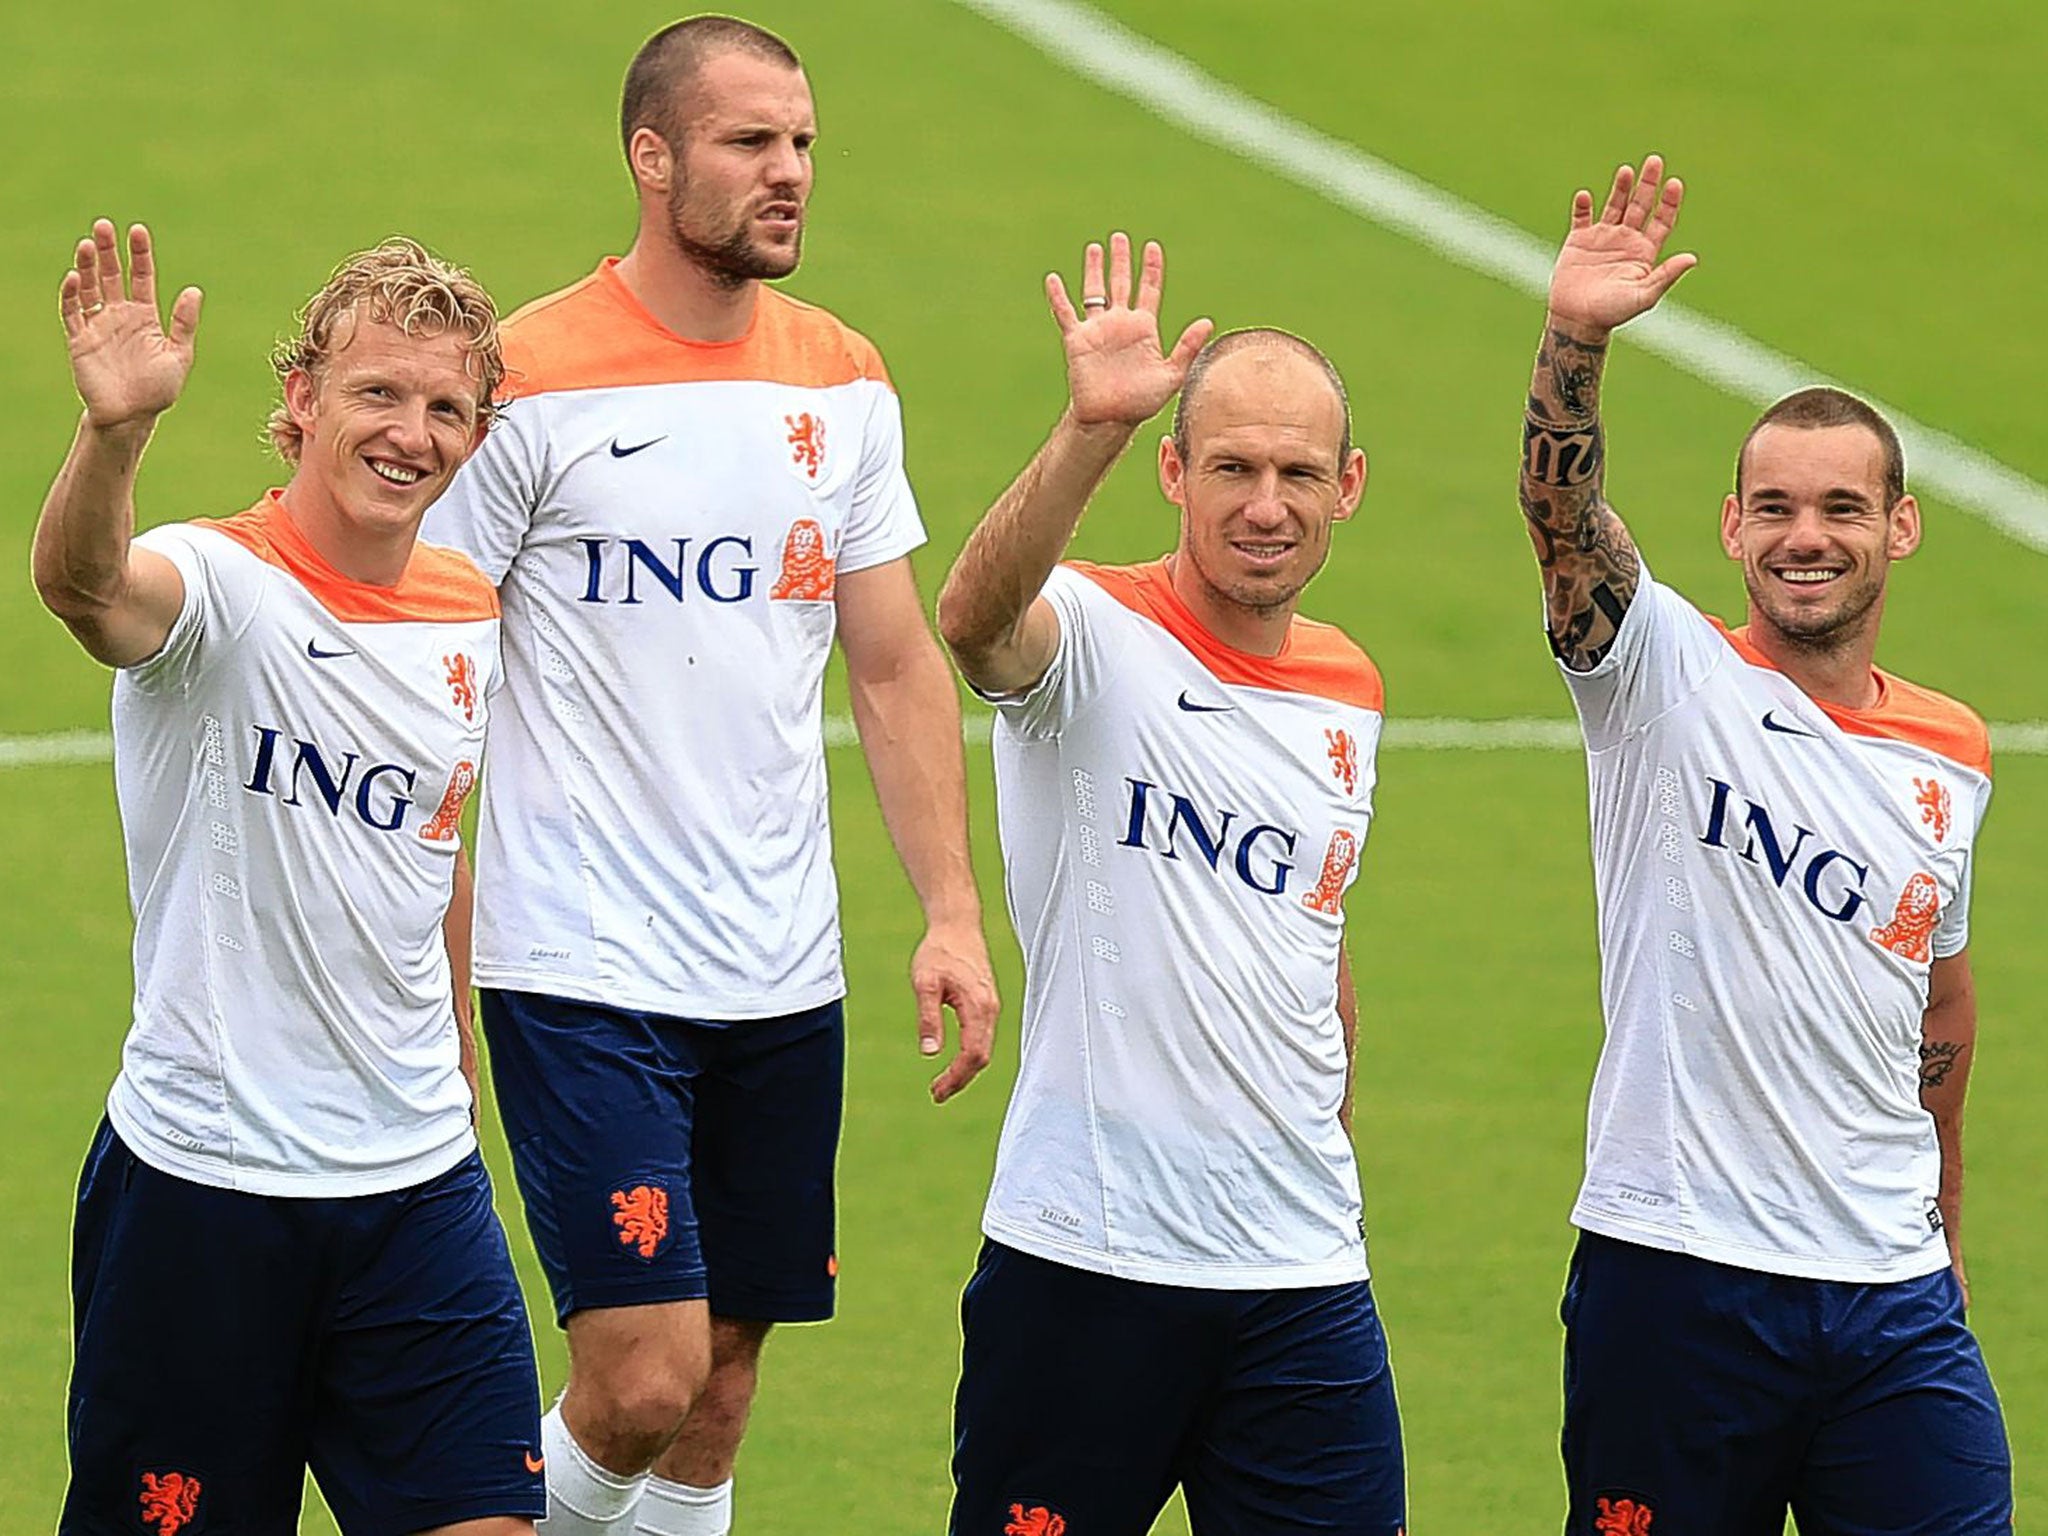 Dirk Kuyt, Ron Vlaar, Arjen Robben and Wesley Sneijder wave to their families during training today